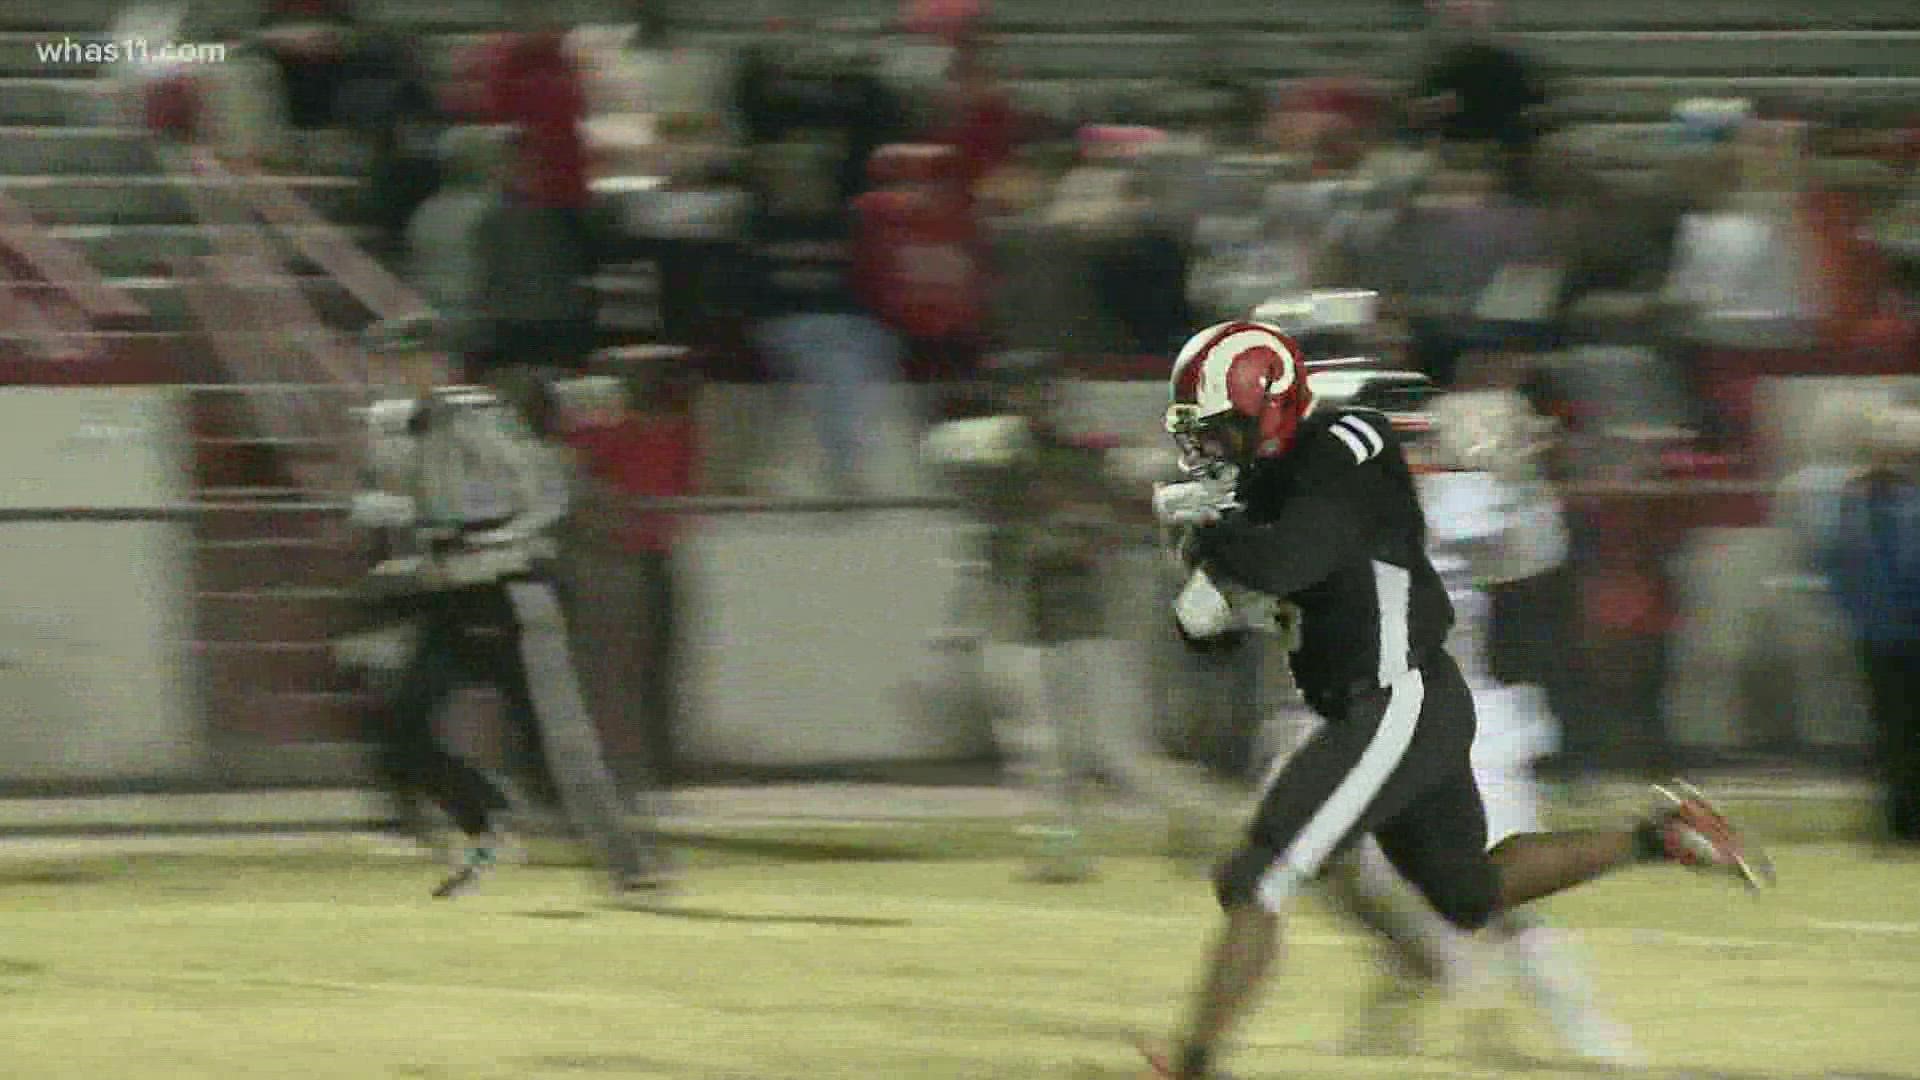 The last time Manual took on St. X, the Tigers crushed the Crimsons 42-10. Manual is hoping for a closer match this time.